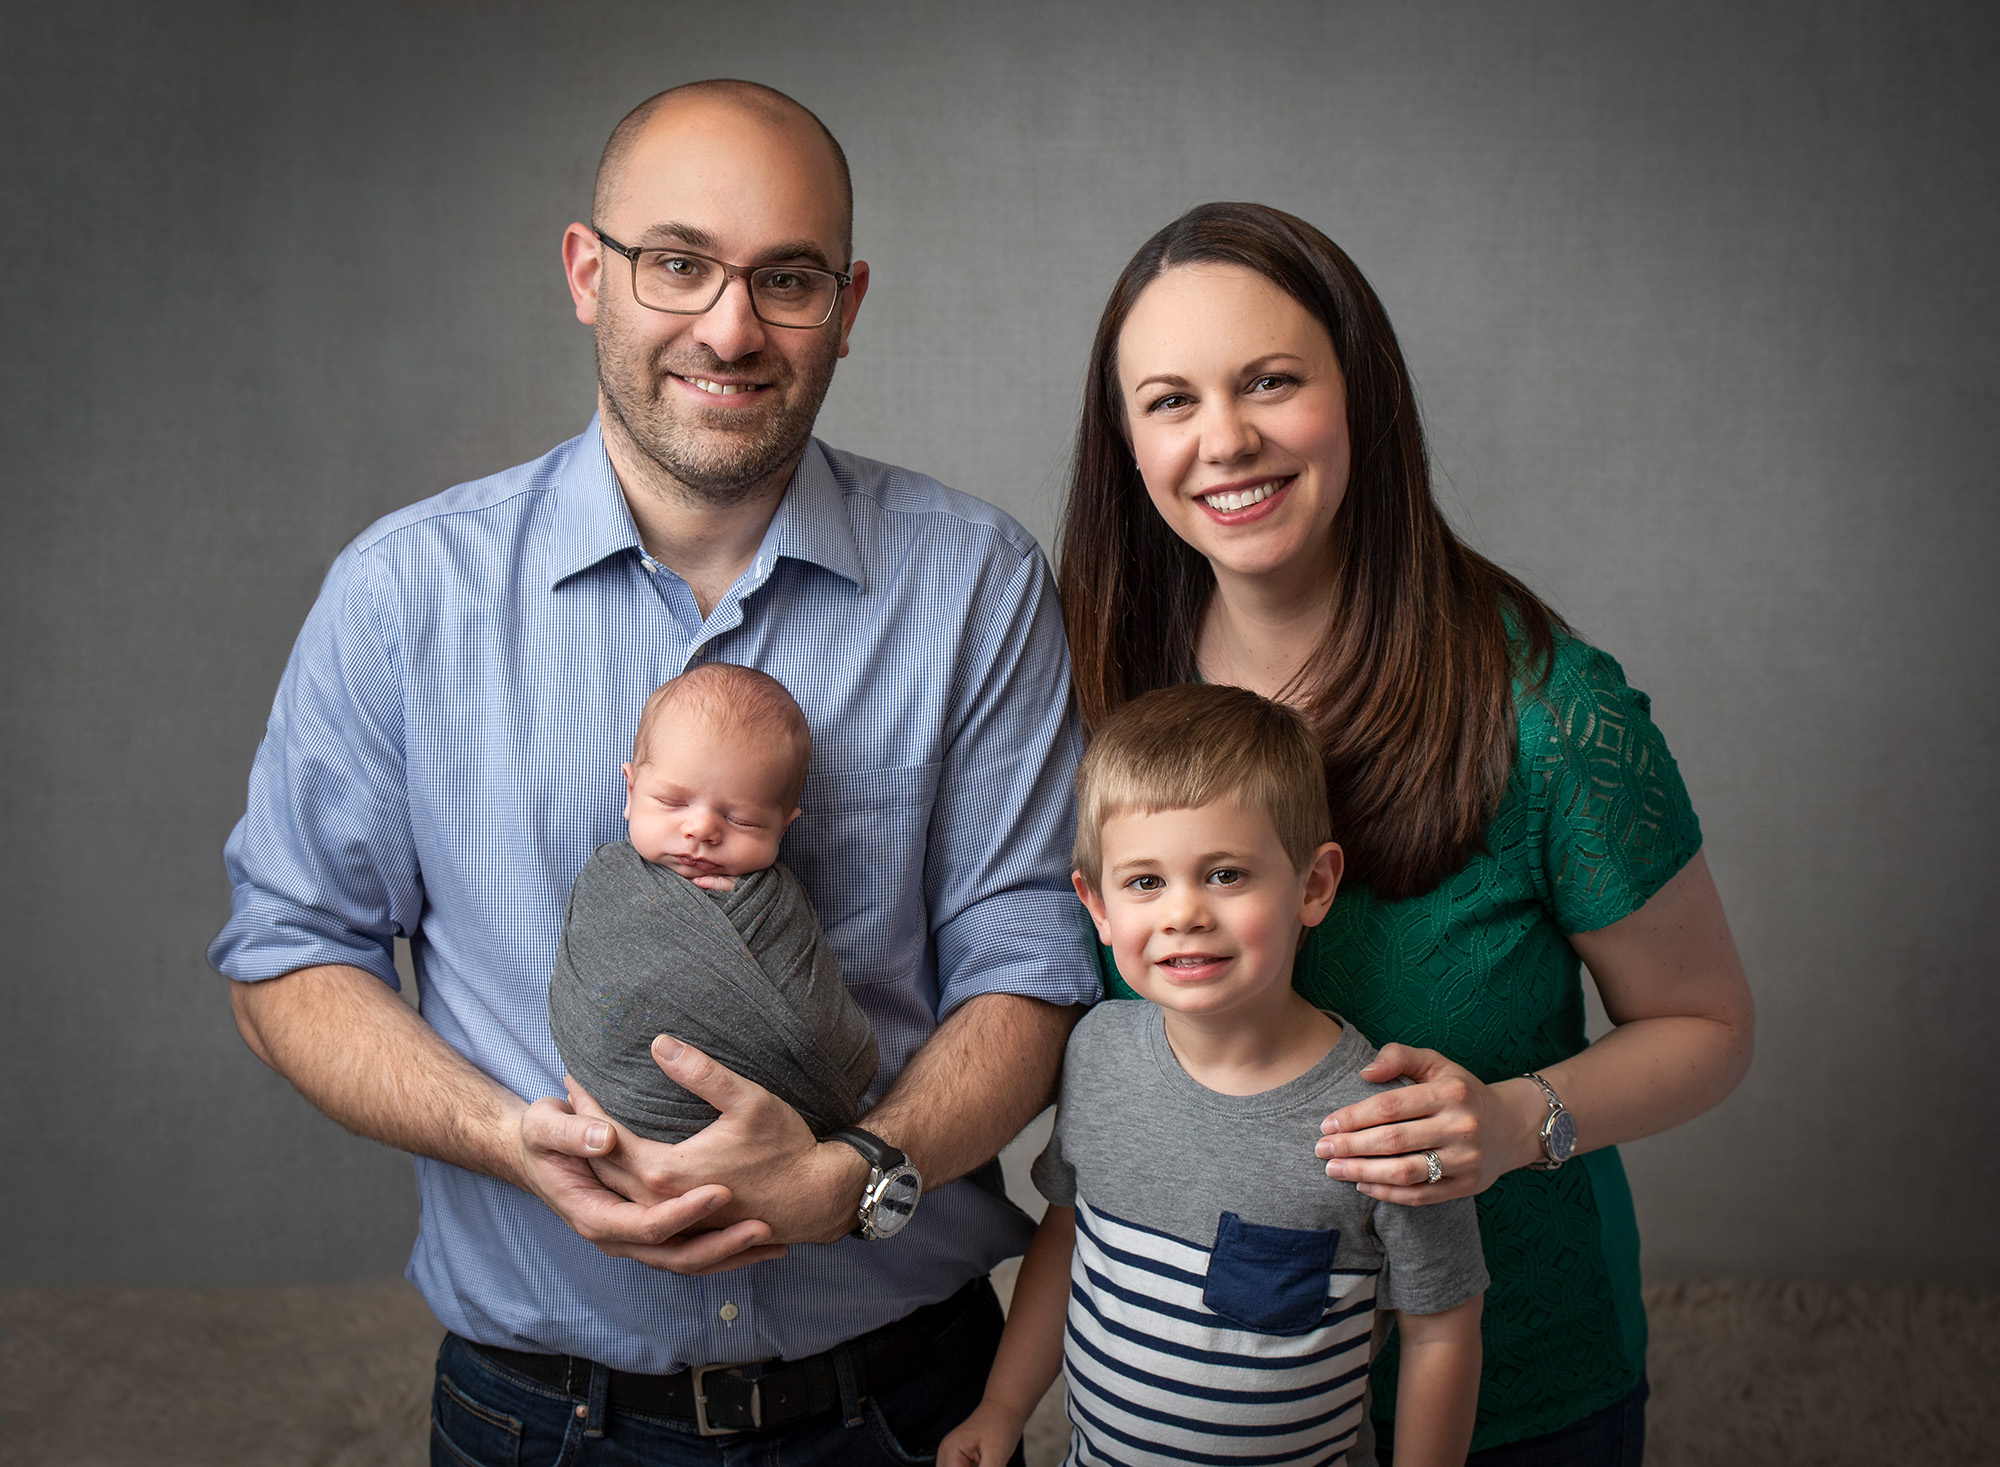 couple posing with young son and newborn baby boy swaddled in gray